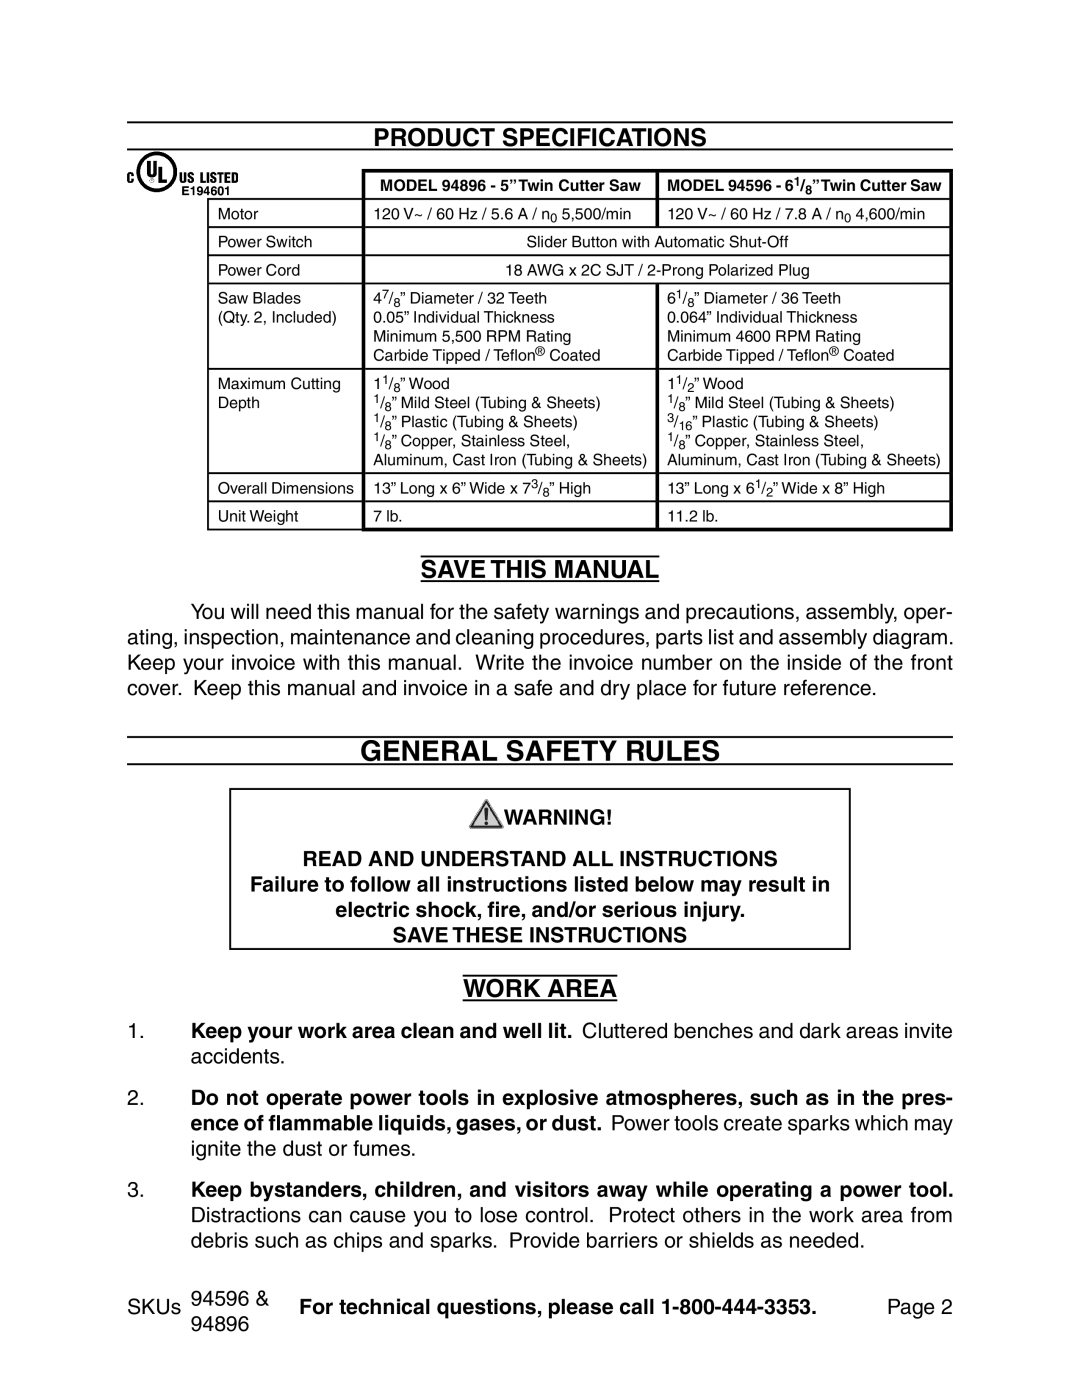 Chicago Electric 94596 manual General Safety Rules, Product Specifications, Save This Manual, Work Area 